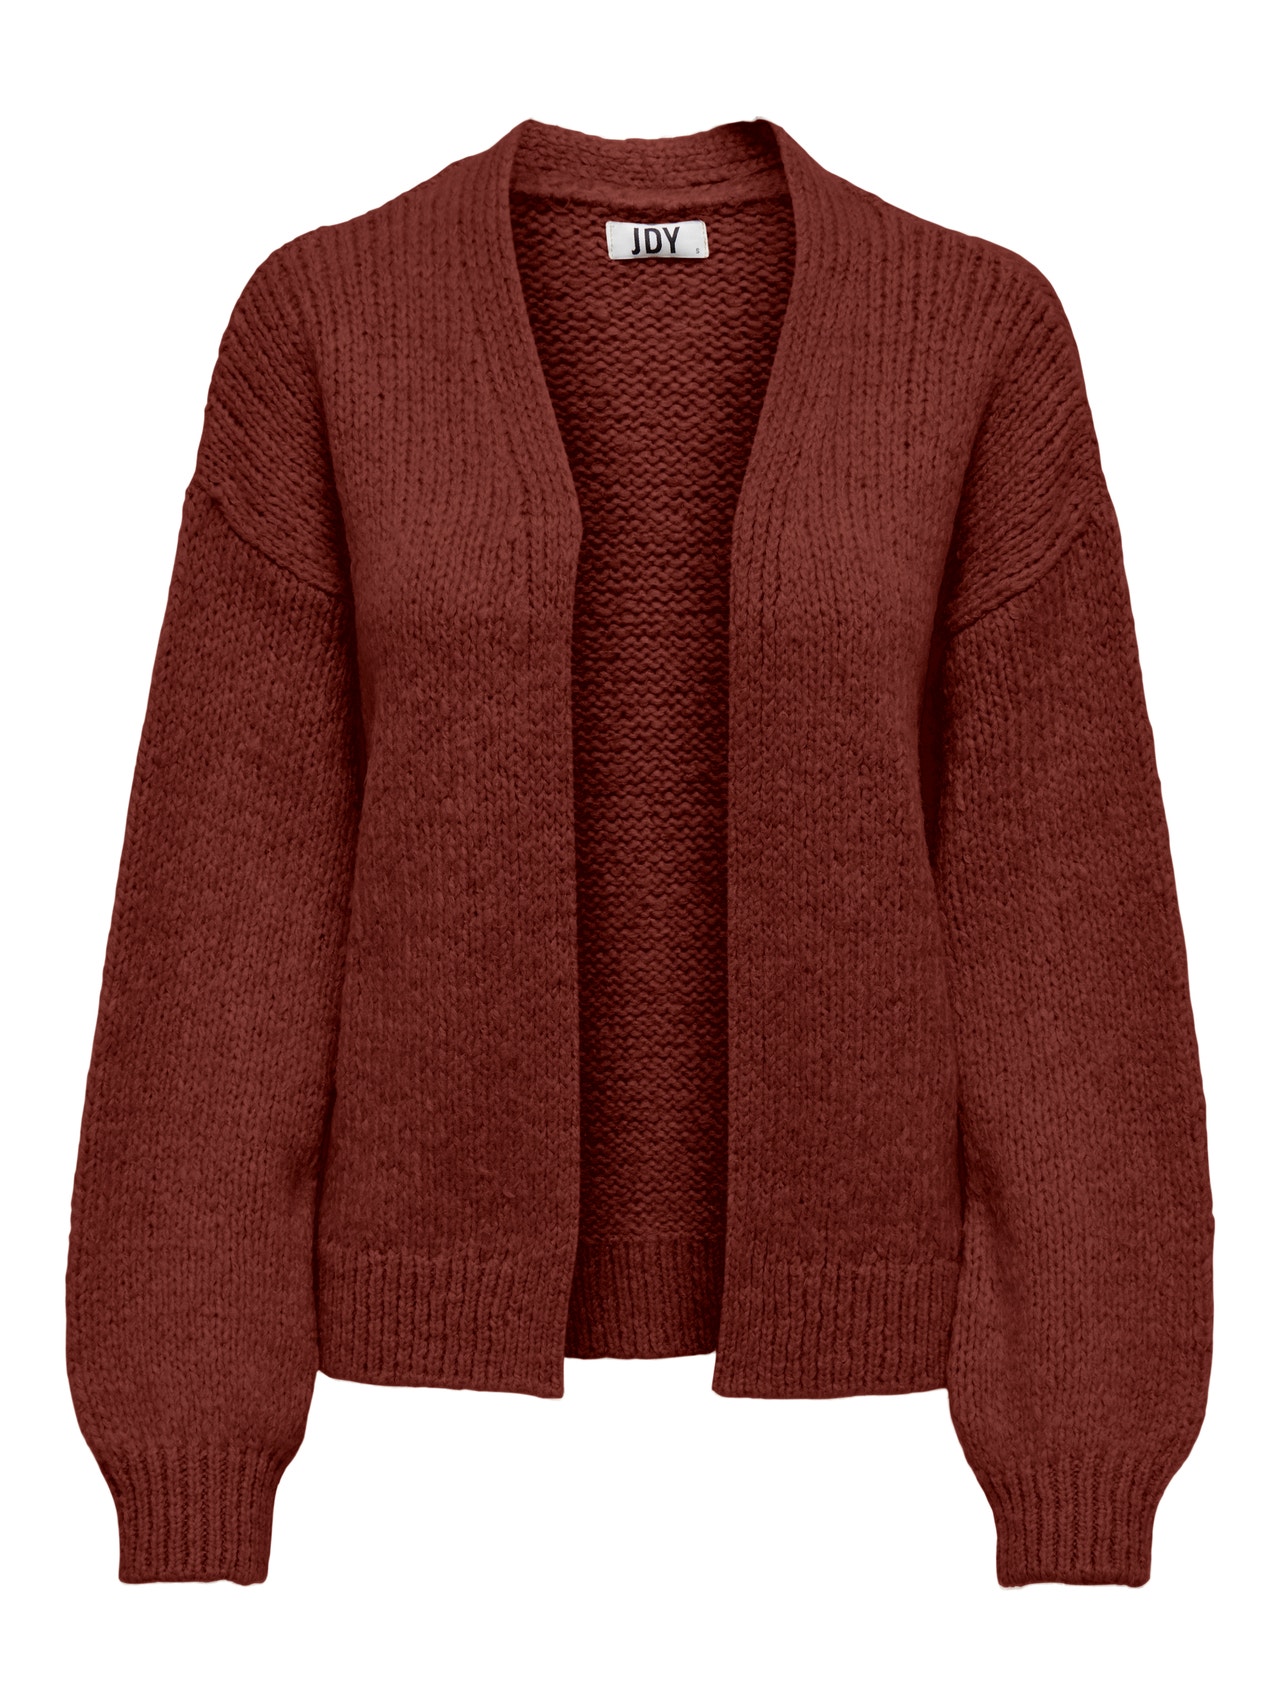 ONLY Solid colored Knitted Cardigan -Burnt Henna - 15268468